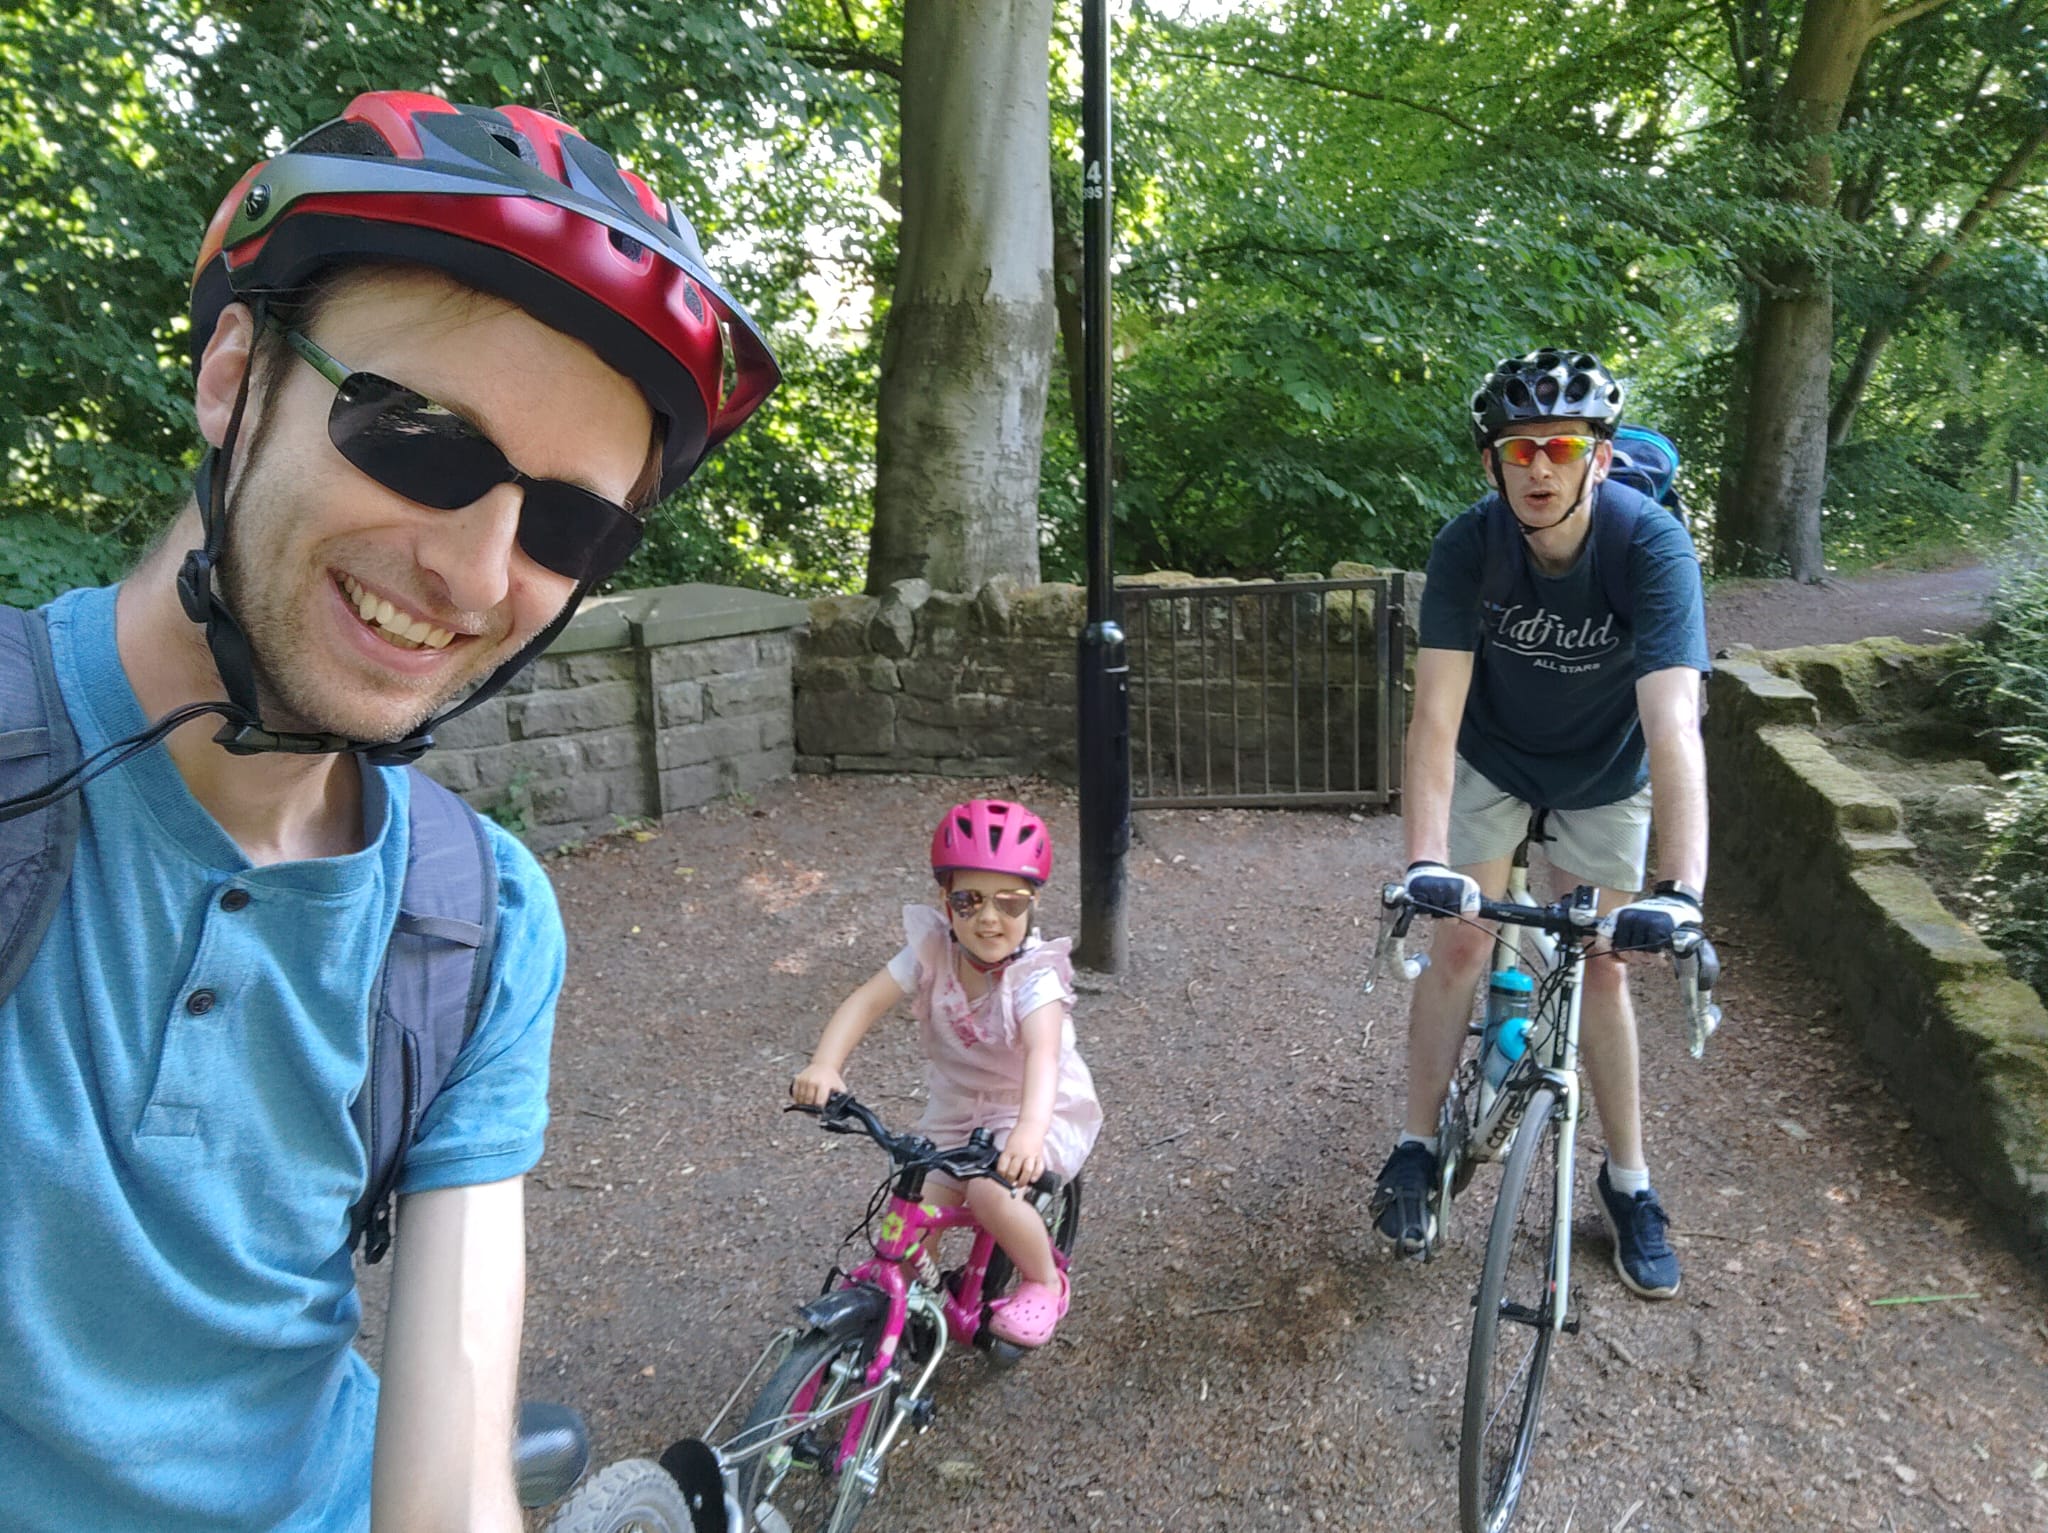 Myself and daughter on followme tandem, friend on road cycle